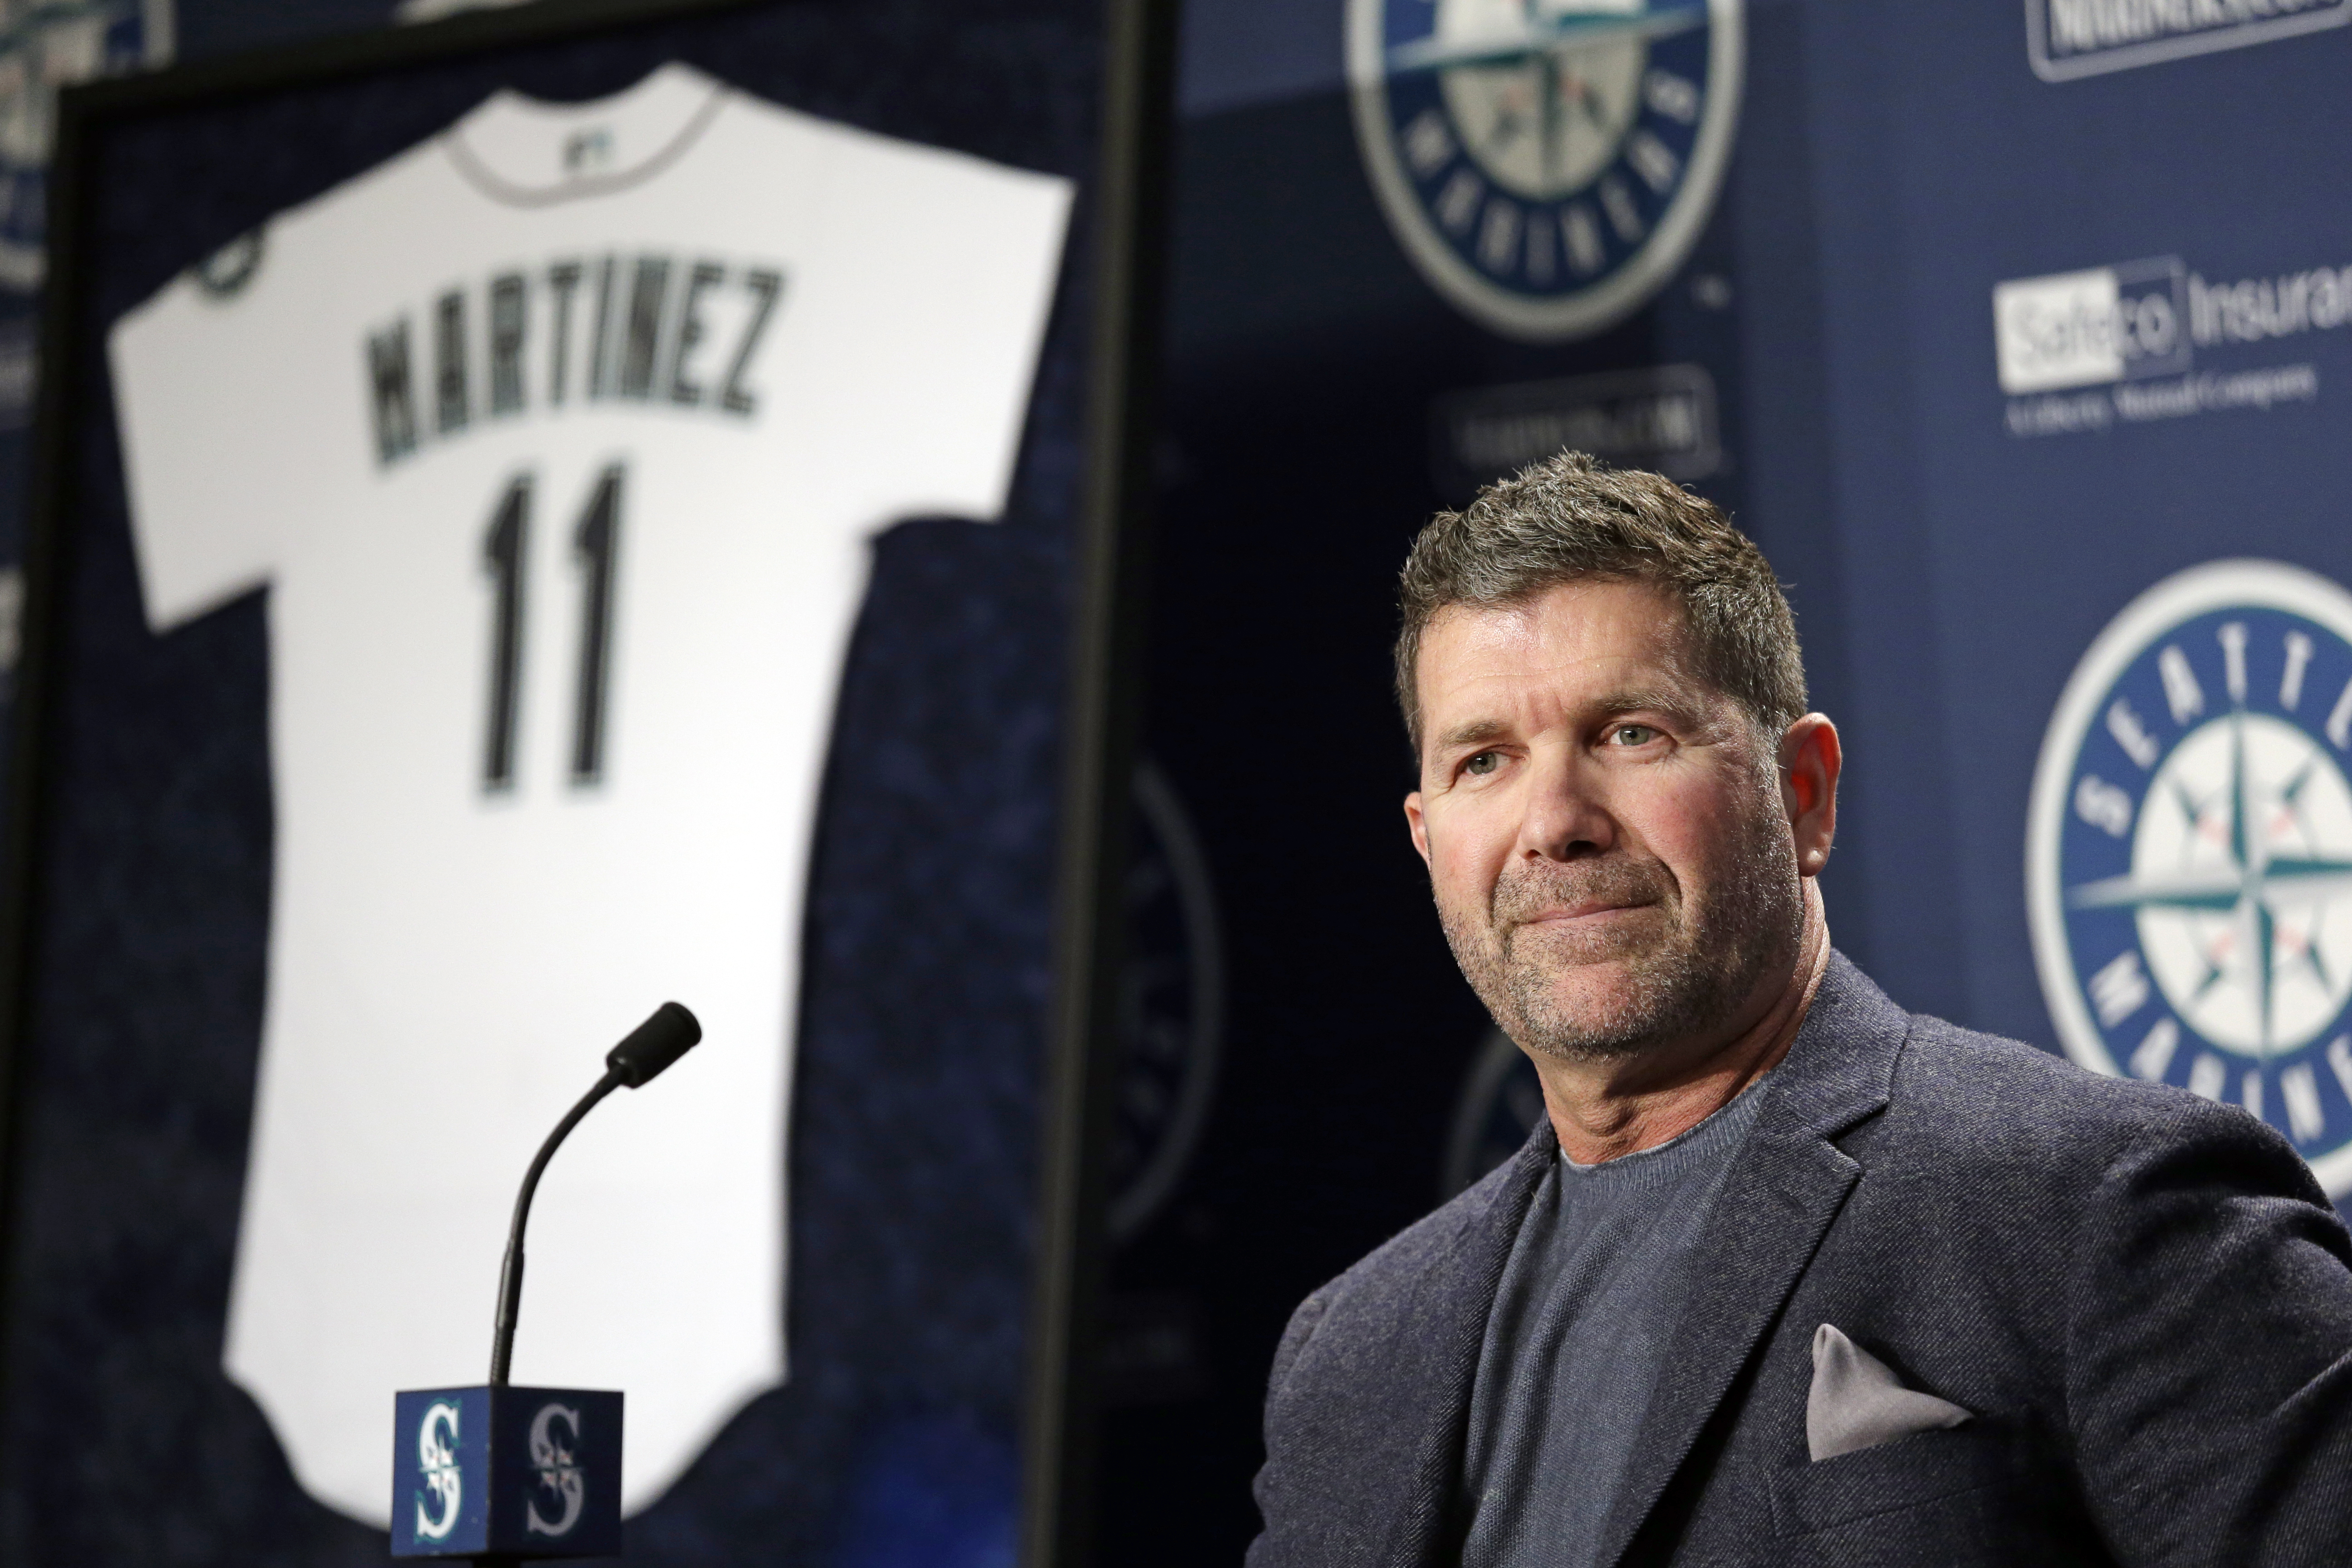 KUOW - Does Mariners slugger Edgar Martinez belong in the Hall of Fame?